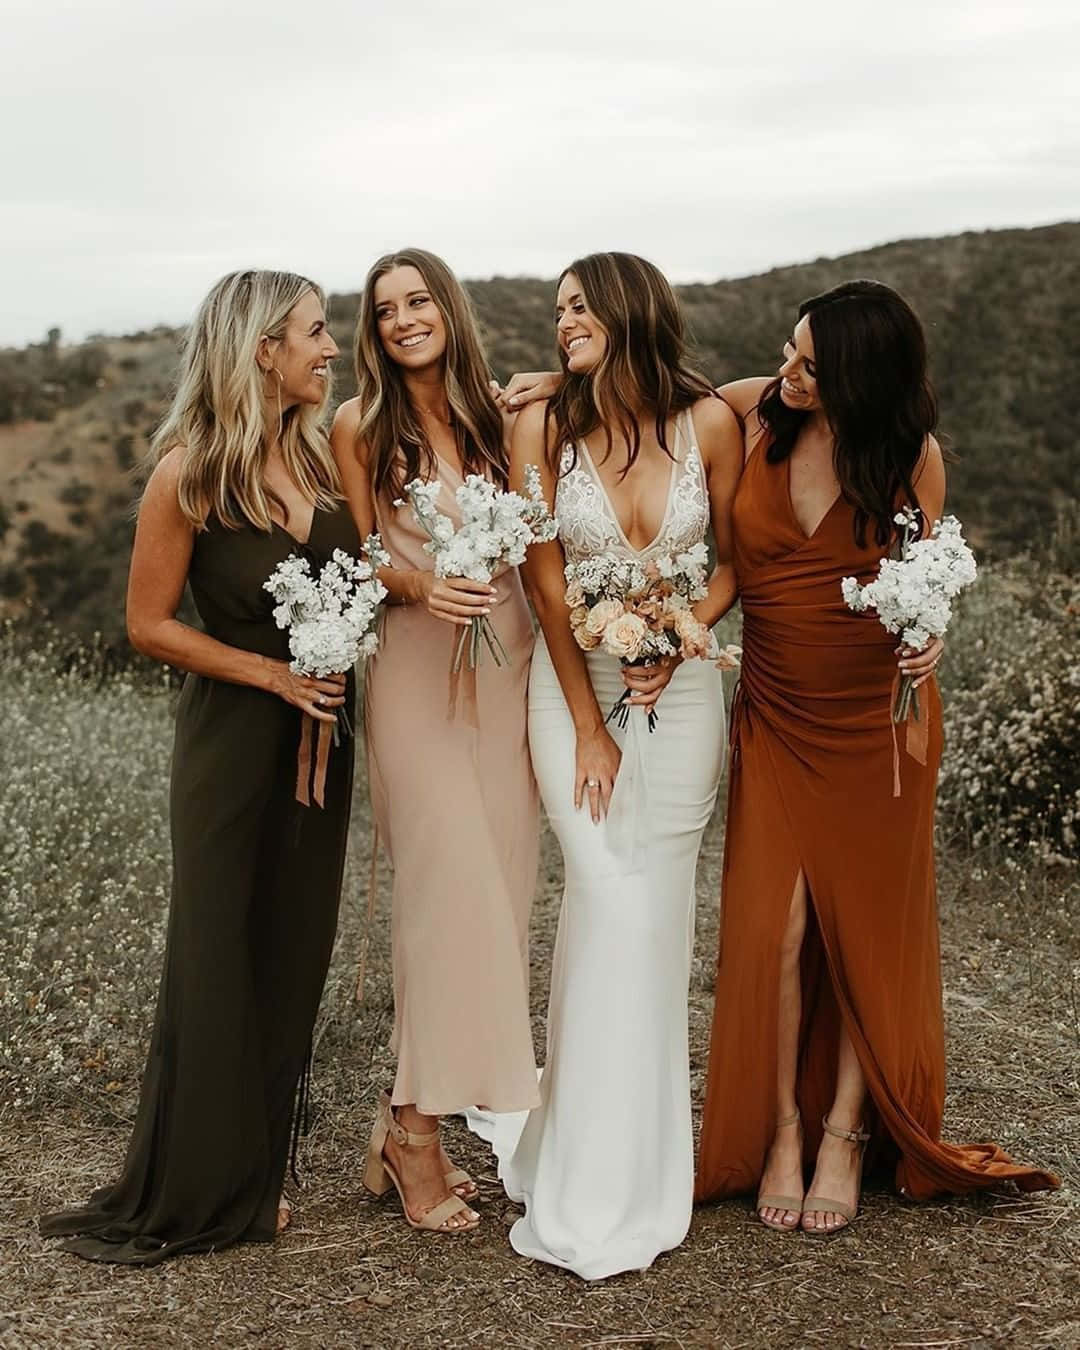 Bride With Three Bridesmaids Picture